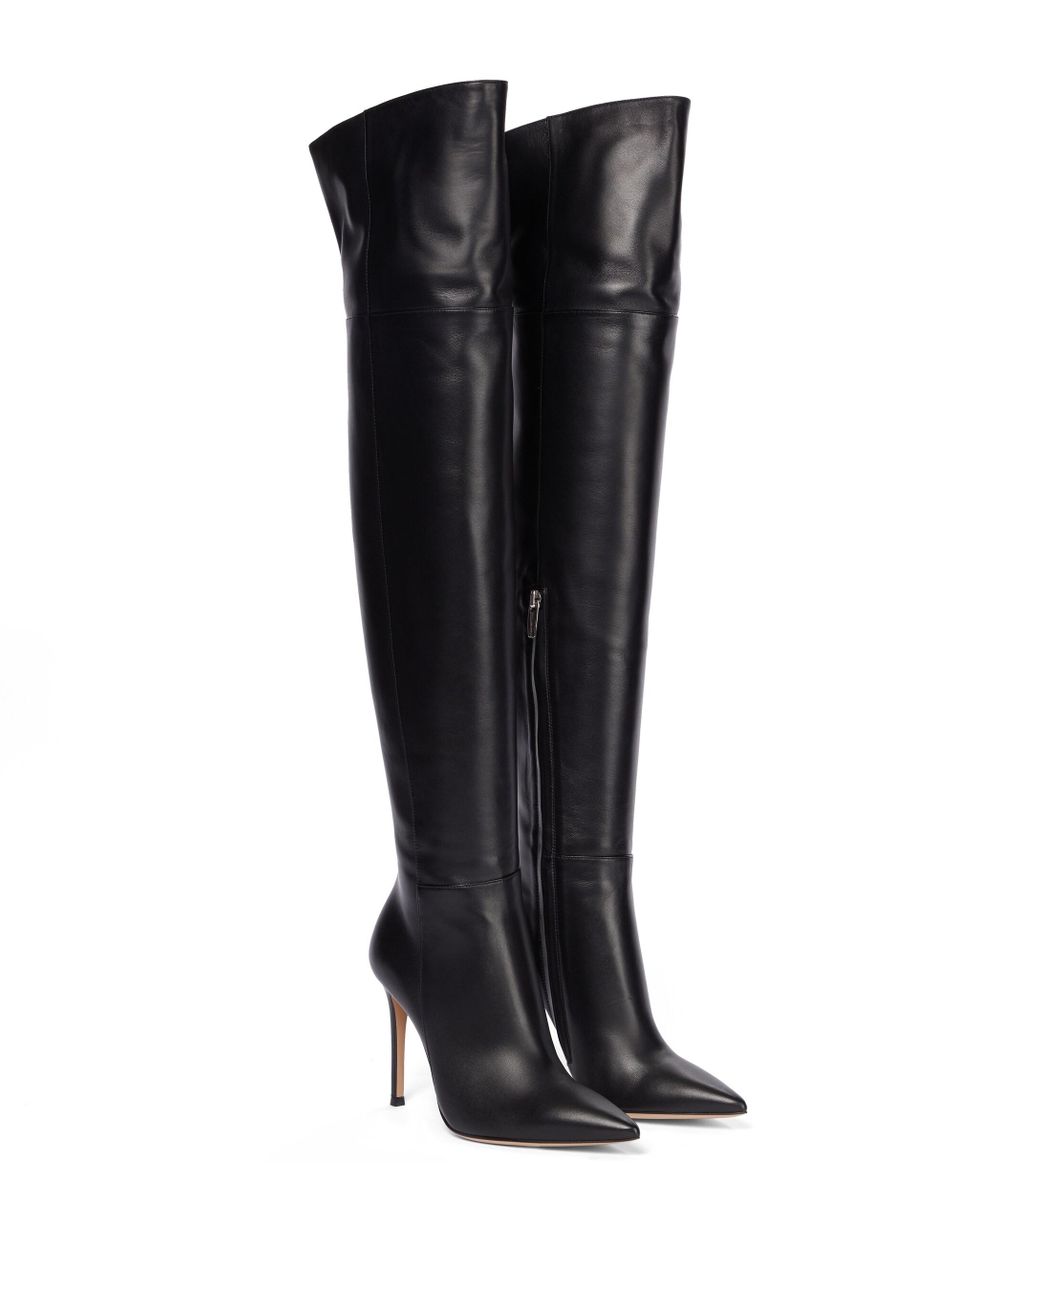 Gianvito Rossi Bea Cuissard Leather Over-knee Boots in Black | Lyst